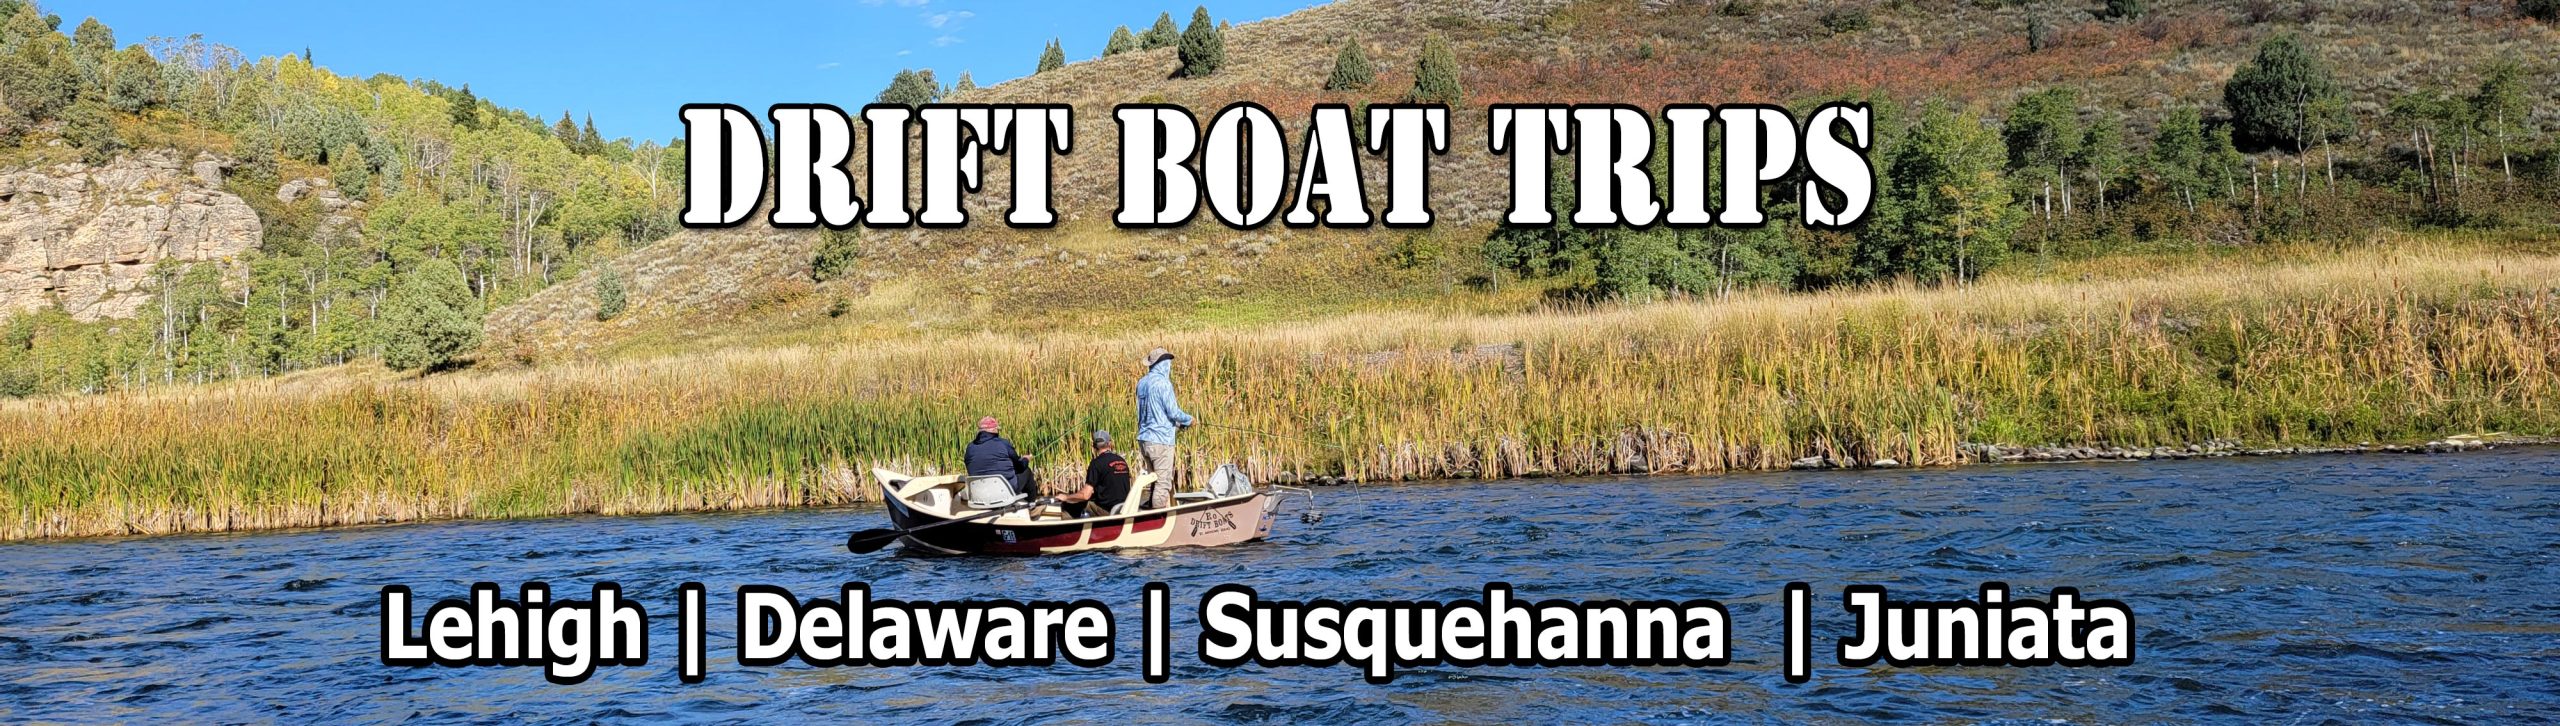 Join Us On A Drift Boat Trip On The Susquehanna Or Juniata For Smallmouth. Trout, We Offer Trips On The Lehigh River along with the Delaware River. We Have Rafts And Drift Boats To Serve Our Clients.